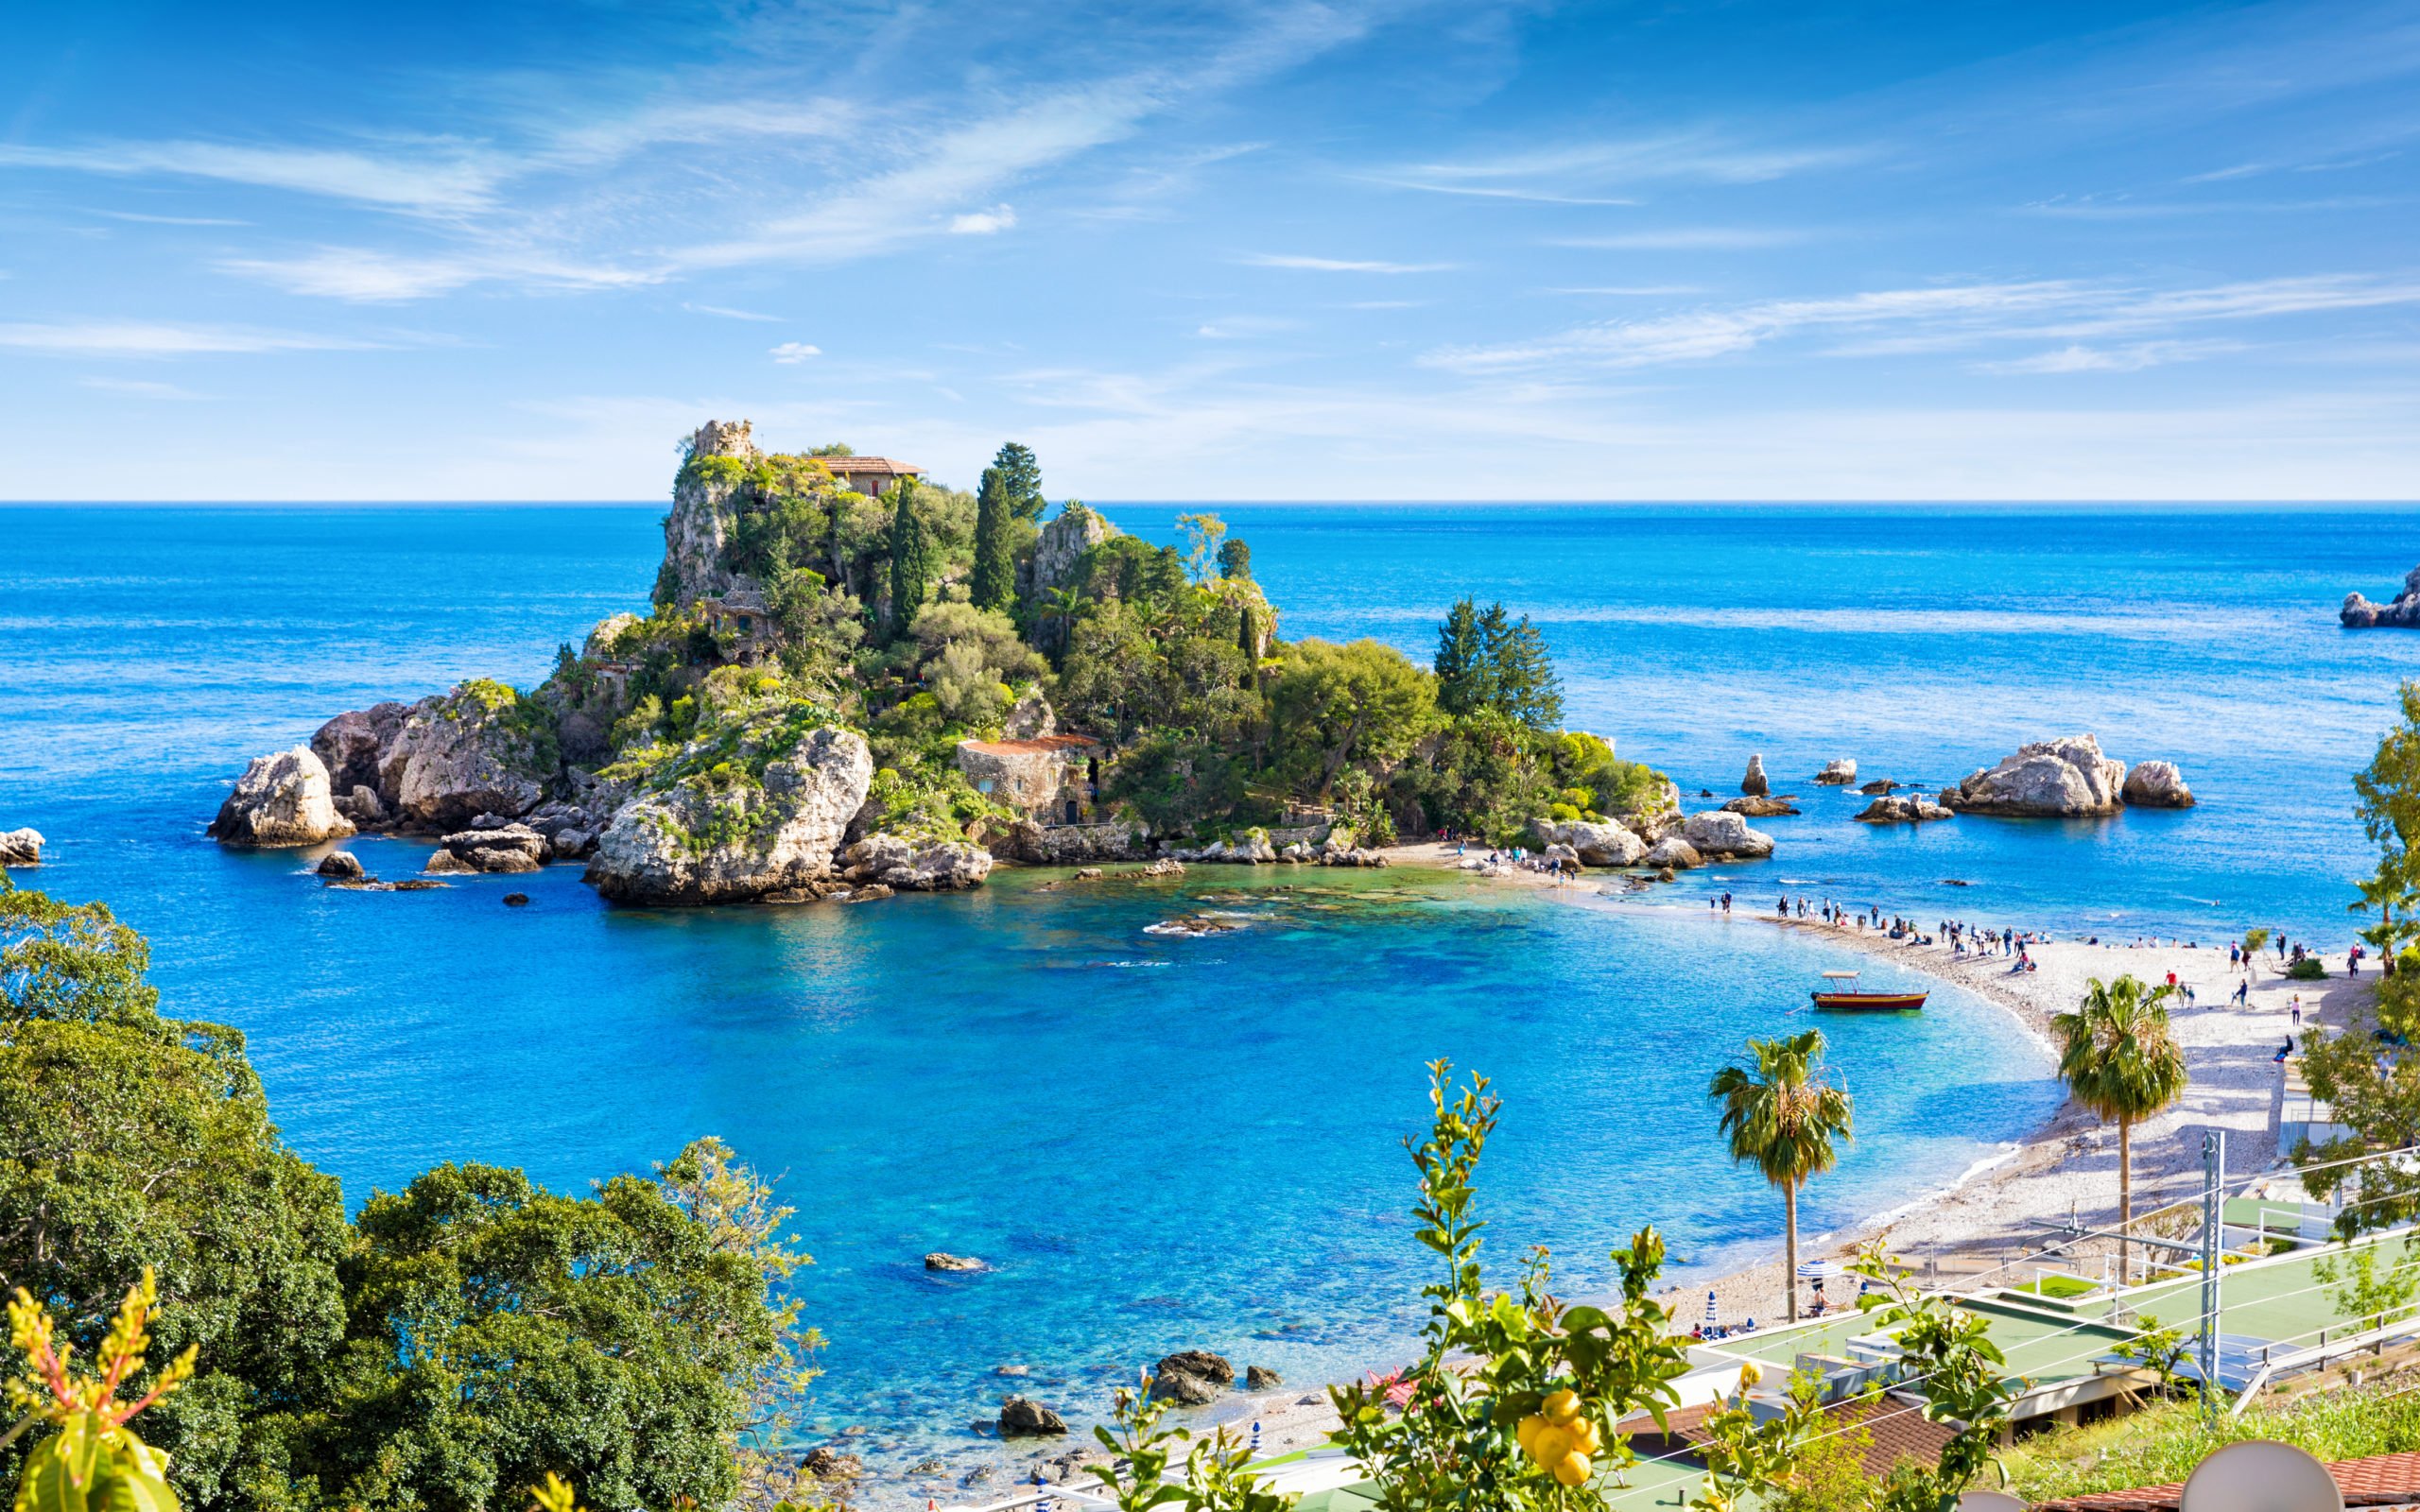 Visit The Isola Bella On The Isolabella & Blue Cave Boat Tour From Taormina